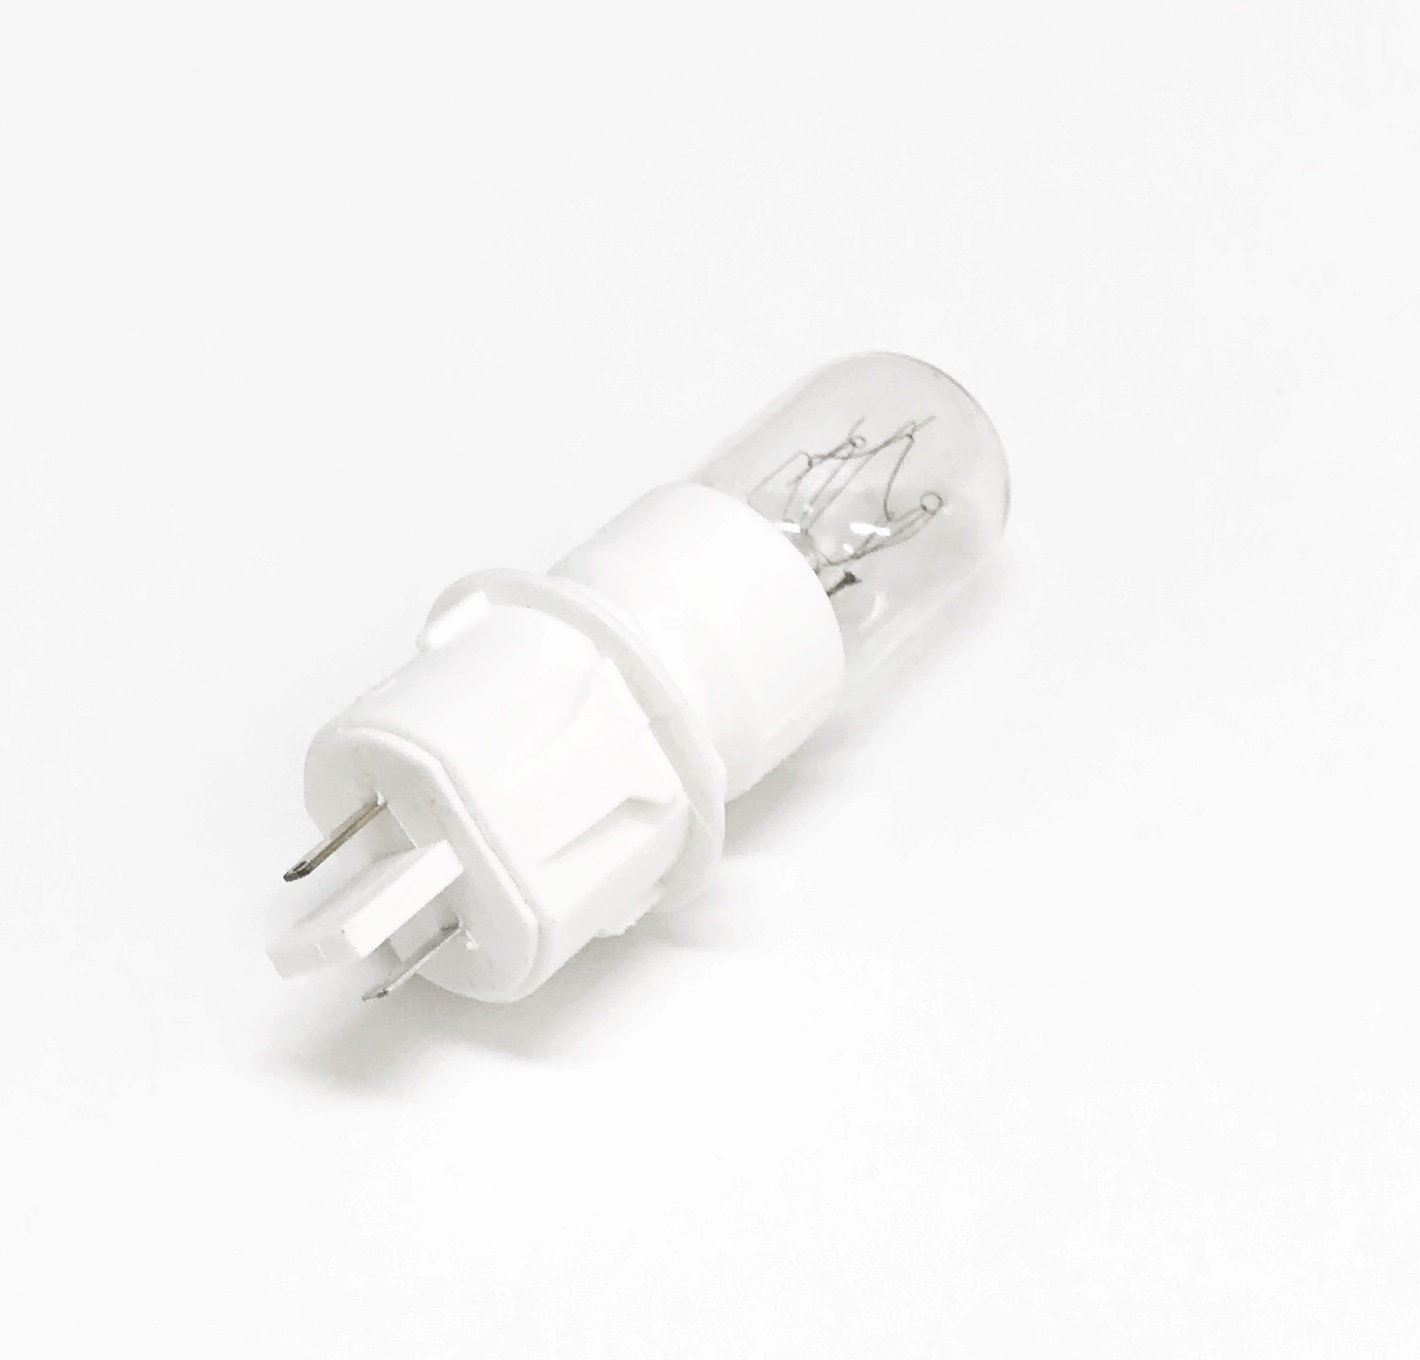 LG OEM LG Dryer Lamp Bulb Shipped With DLEY1201W, DLEY1701V, DLEY1701VE, DLEY1701WE